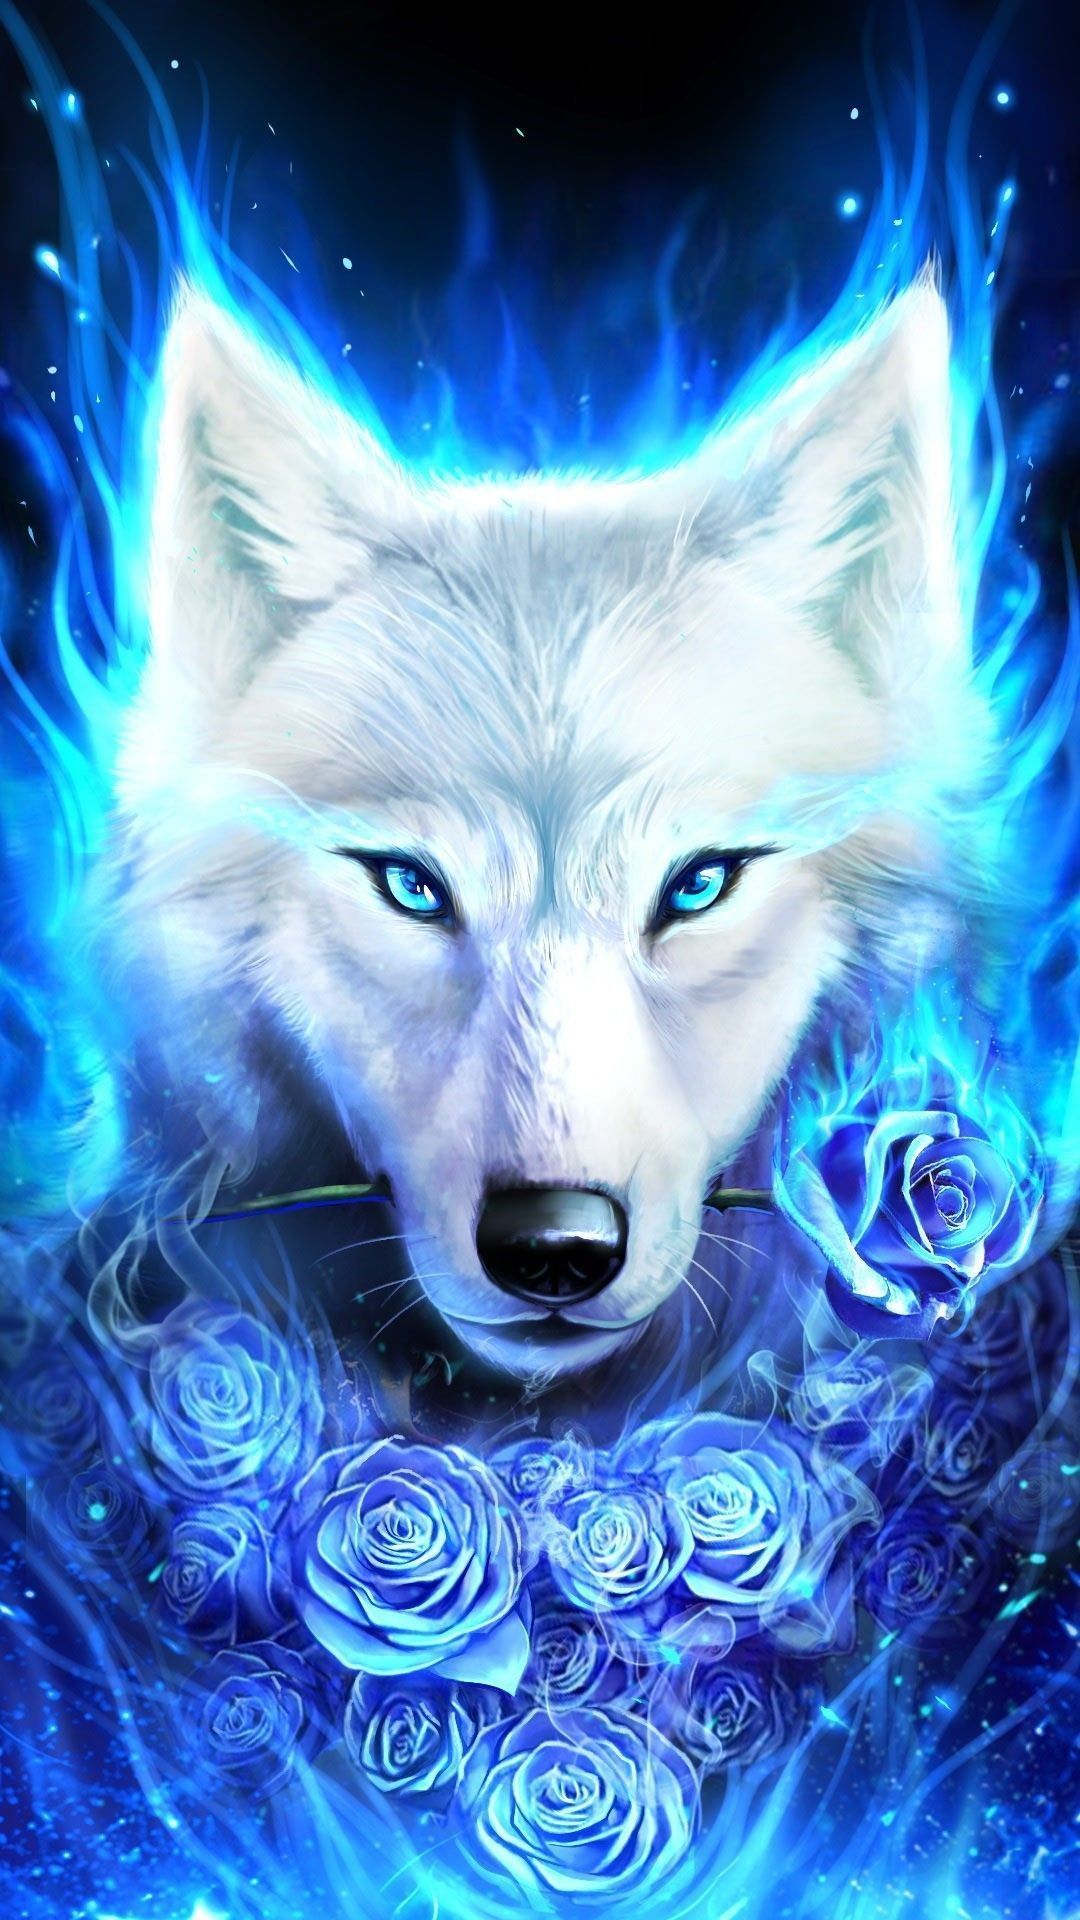 Epic Wolf Wallpaper Background For iPhone Wallpaper on Hupages.com, if you like it dont forget save it or re. Wolf spirit animal, Ice wolf wallpaper, Wolf spirit